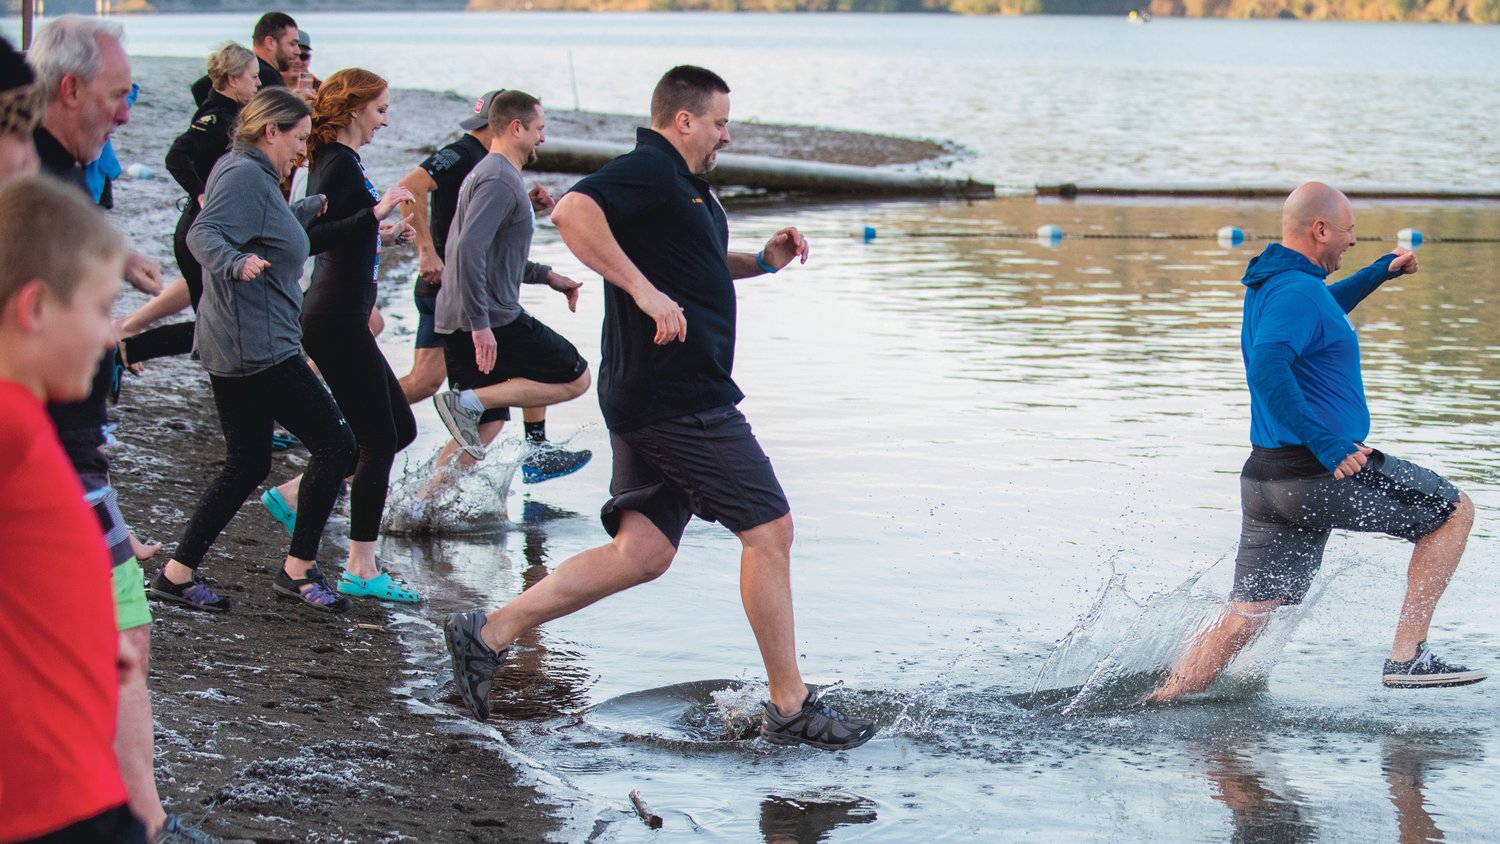 State Rep. Peter Abbarno leads a Polar Plunge into Mayfield Lake followed by Centralia Police Chief Stacy Denham during an event that benefits Lewis County Special Olympics athletes in January 2023.